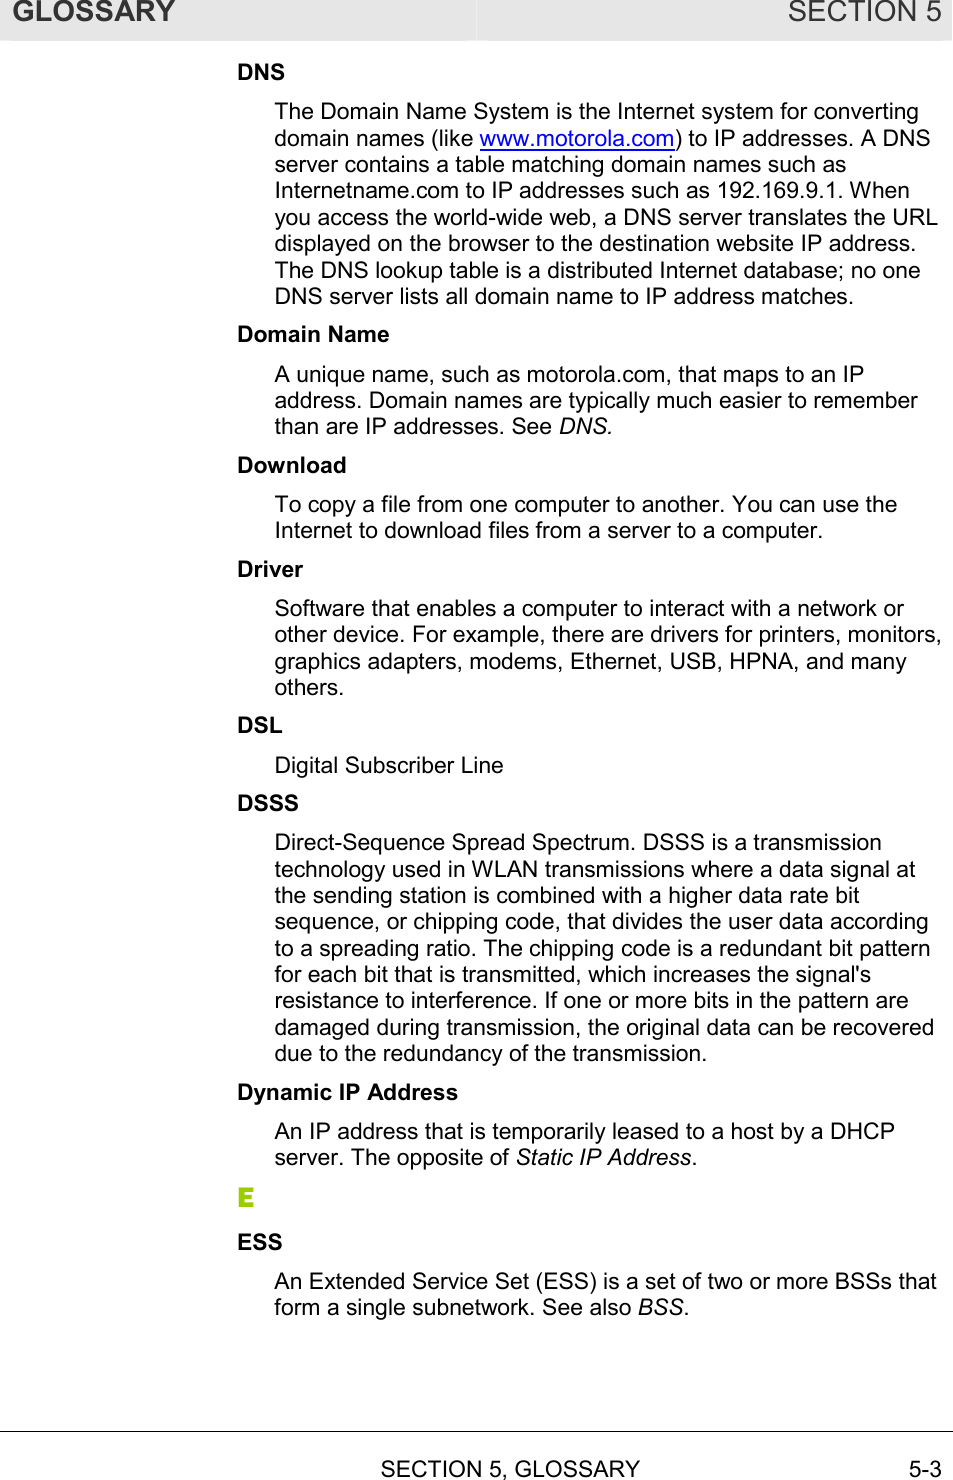 GLOSSARY SECTION 5  SECTION 5, GLOSSARY 5-3 DNS The Domain Name System is the Internet system for converting domain names (like www.motorola.com) to IP addresses. A DNS server contains a table matching domain names such as Internetname.com to IP addresses such as 192.169.9.1. When you access the world-wide web, a DNS server translates the URL displayed on the browser to the destination website IP address. The DNS lookup table is a distributed Internet database; no one DNS server lists all domain name to IP address matches. Domain Name A unique name, such as motorola.com, that maps to an IP address. Domain names are typically much easier to remember than are IP addresses. See DNS. Download To copy a file from one computer to another. You can use the Internet to download files from a server to a computer.  Driver Software that enables a computer to interact with a network or other device. For example, there are drivers for printers, monitors, graphics adapters, modems, Ethernet, USB, HPNA, and many others. DSL Digital Subscriber Line DSSS Direct-Sequence Spread Spectrum. DSSS is a transmission technology used in WLAN transmissions where a data signal at the sending station is combined with a higher data rate bit sequence, or chipping code, that divides the user data according to a spreading ratio. The chipping code is a redundant bit pattern for each bit that is transmitted, which increases the signal&apos;s resistance to interference. If one or more bits in the pattern are damaged during transmission, the original data can be recovered due to the redundancy of the transmission.  Dynamic IP Address An IP address that is temporarily leased to a host by a DHCP server. The opposite of Static IP Address. E ESS An Extended Service Set (ESS) is a set of two or more BSSs that form a single subnetwork. See also BSS. 